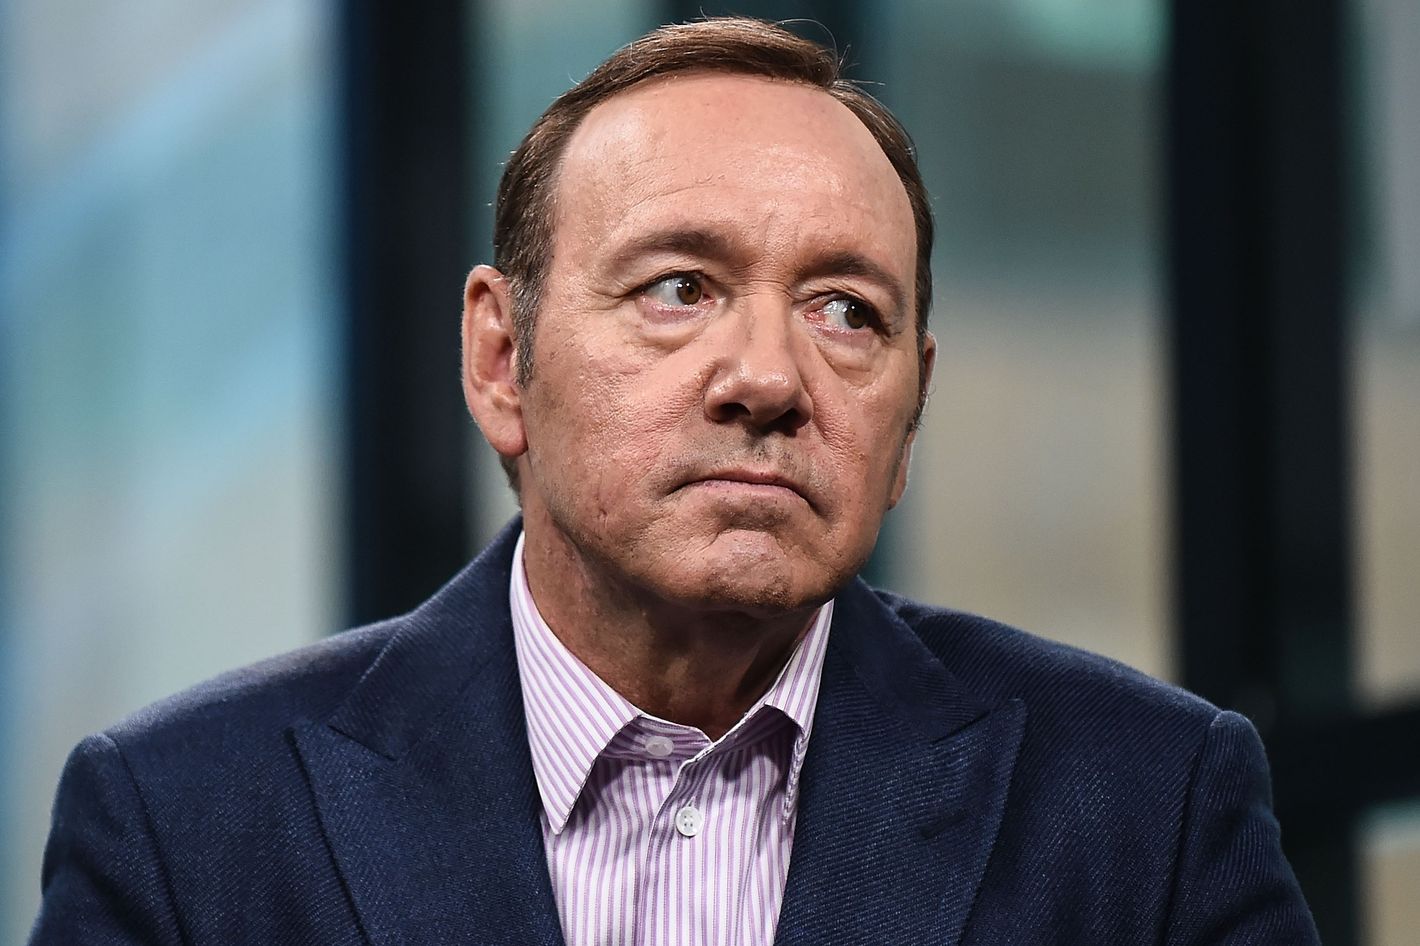 Kevin Spacey Man Alleges Sexual Relationship at 14